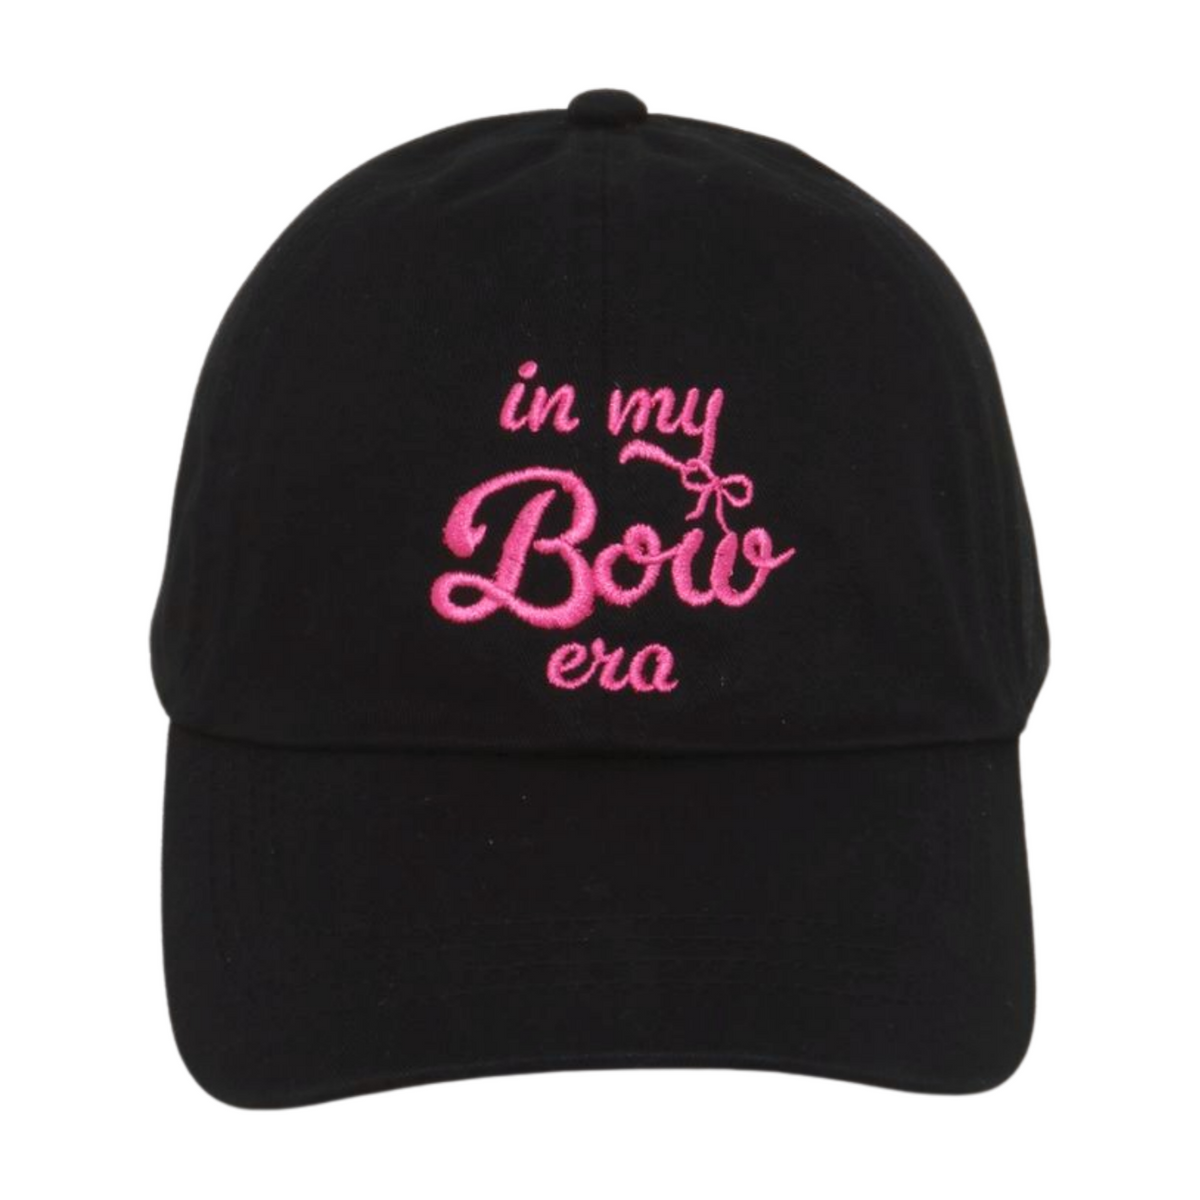 LCAP3622 - IN MY BOW ERA EMBROIDERED BASEBALL CAP